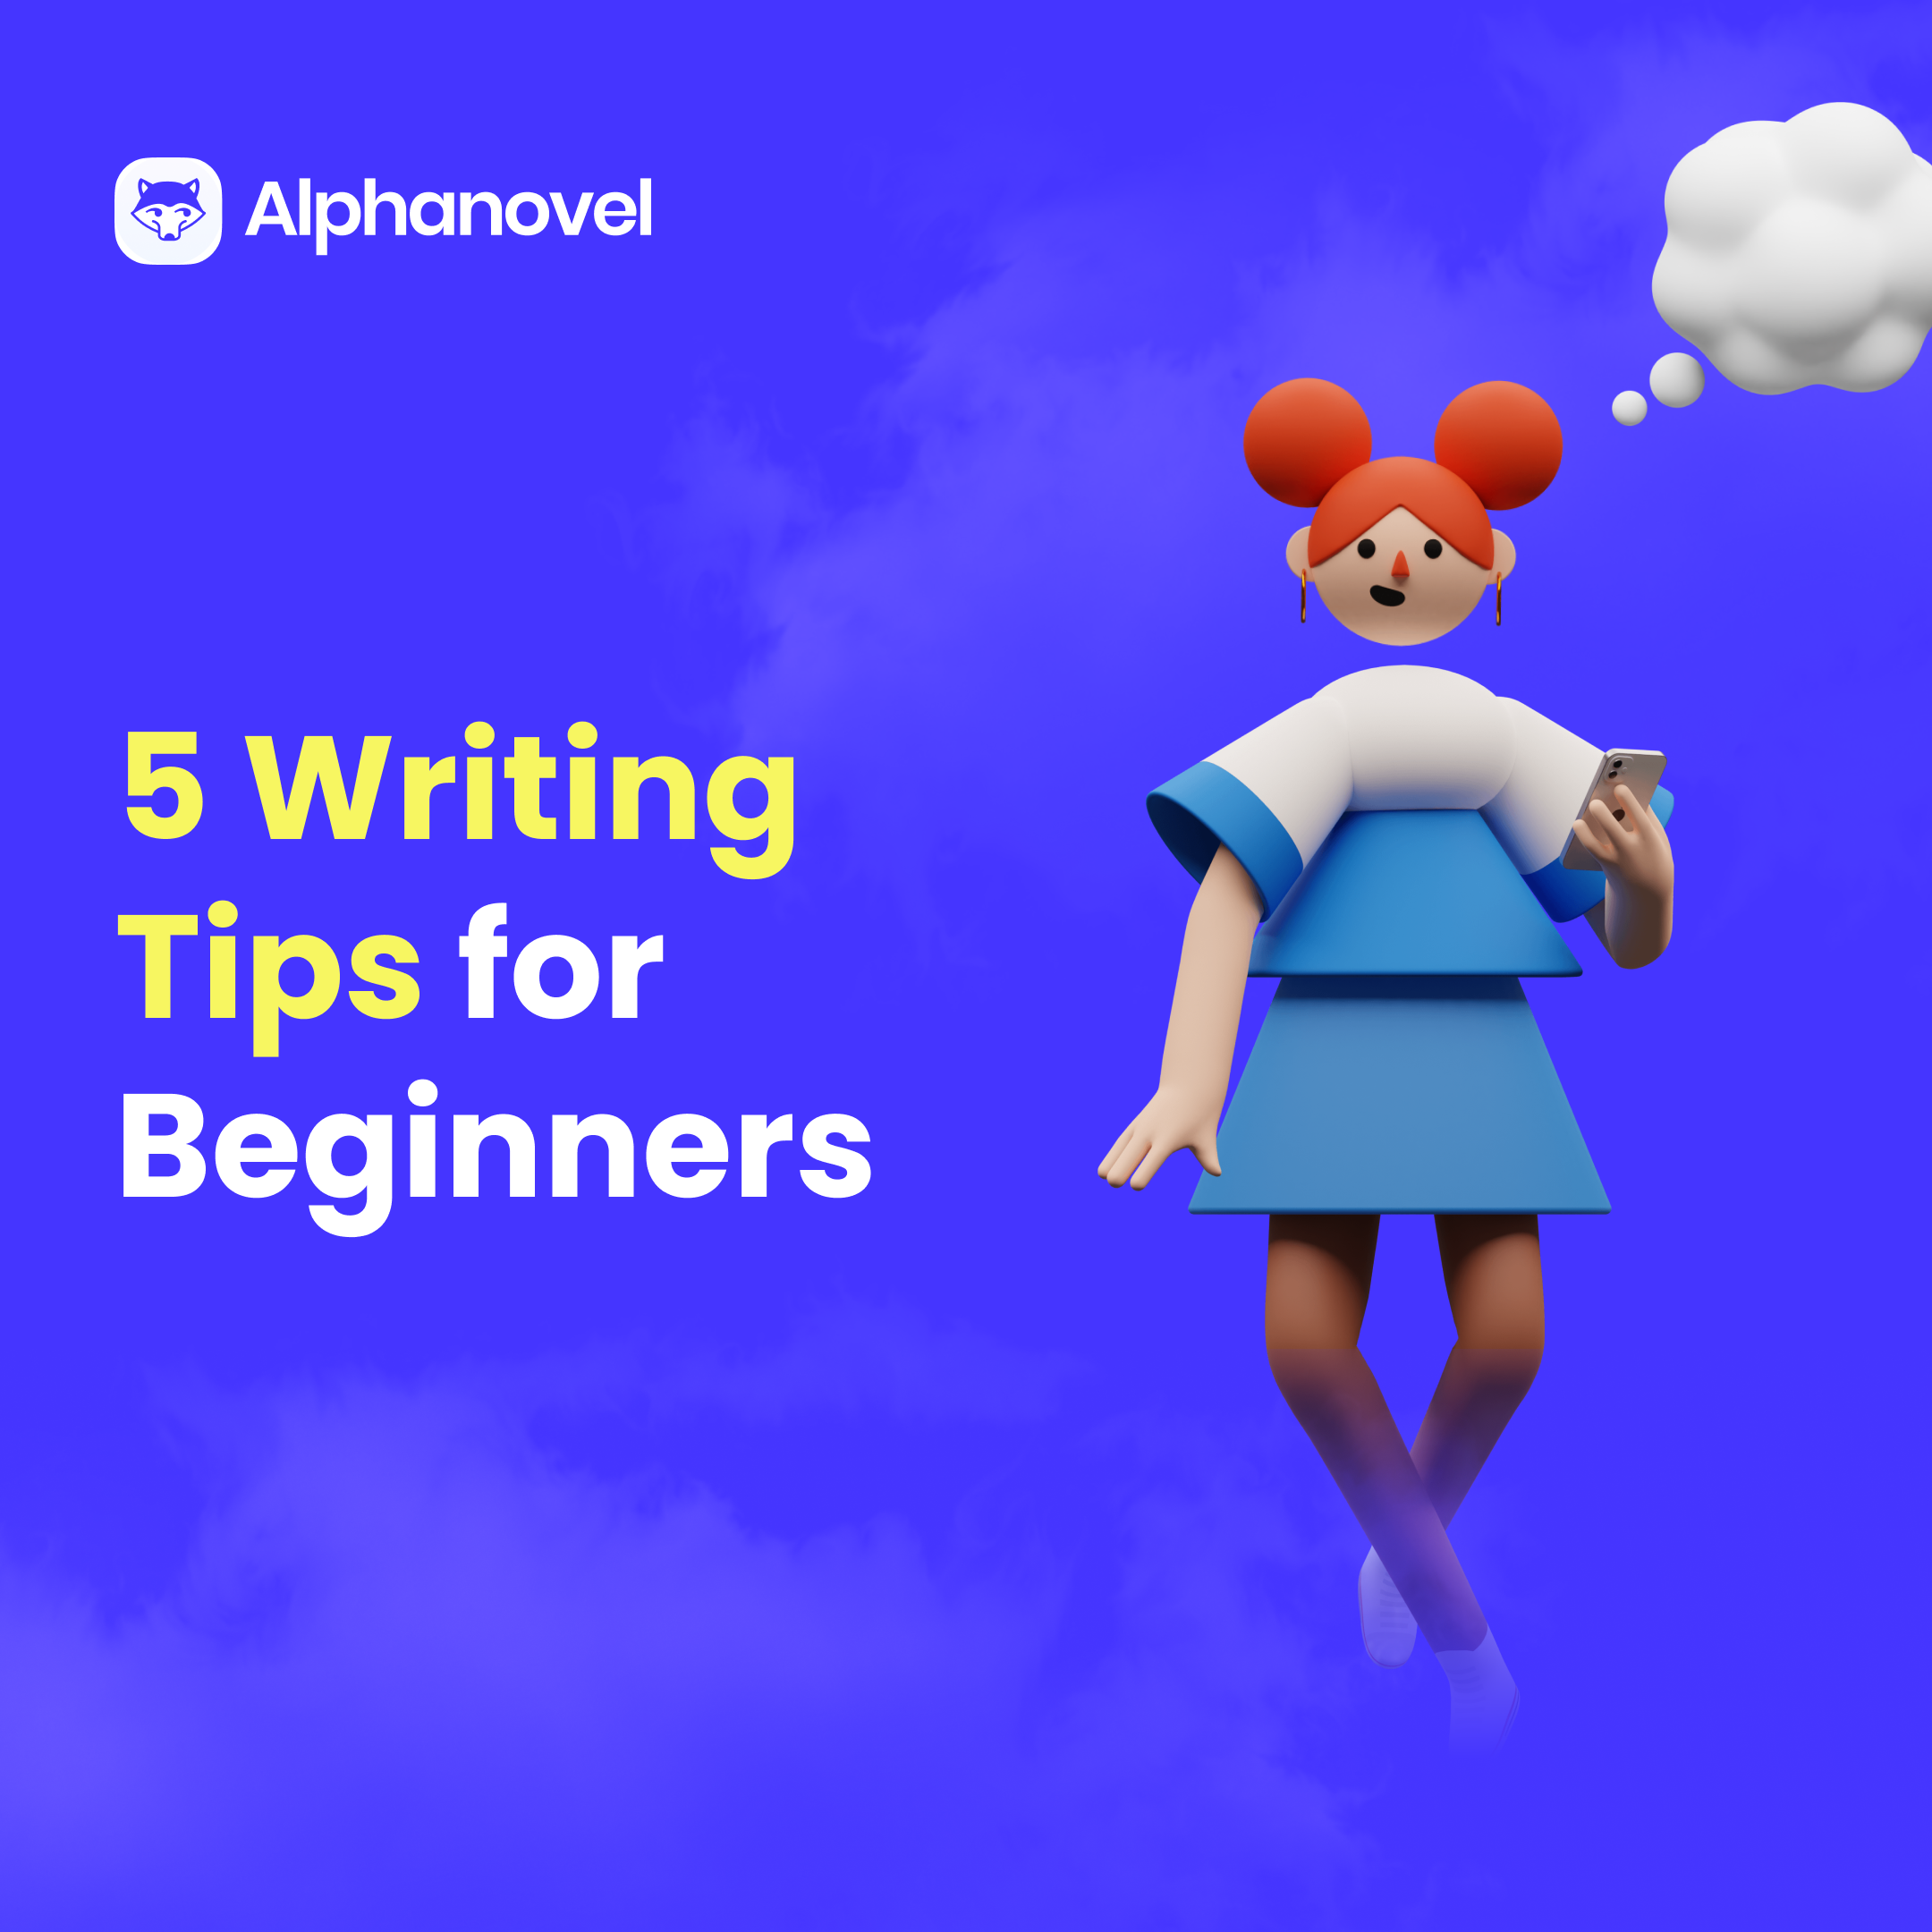 5 Writing Tips for Beginners